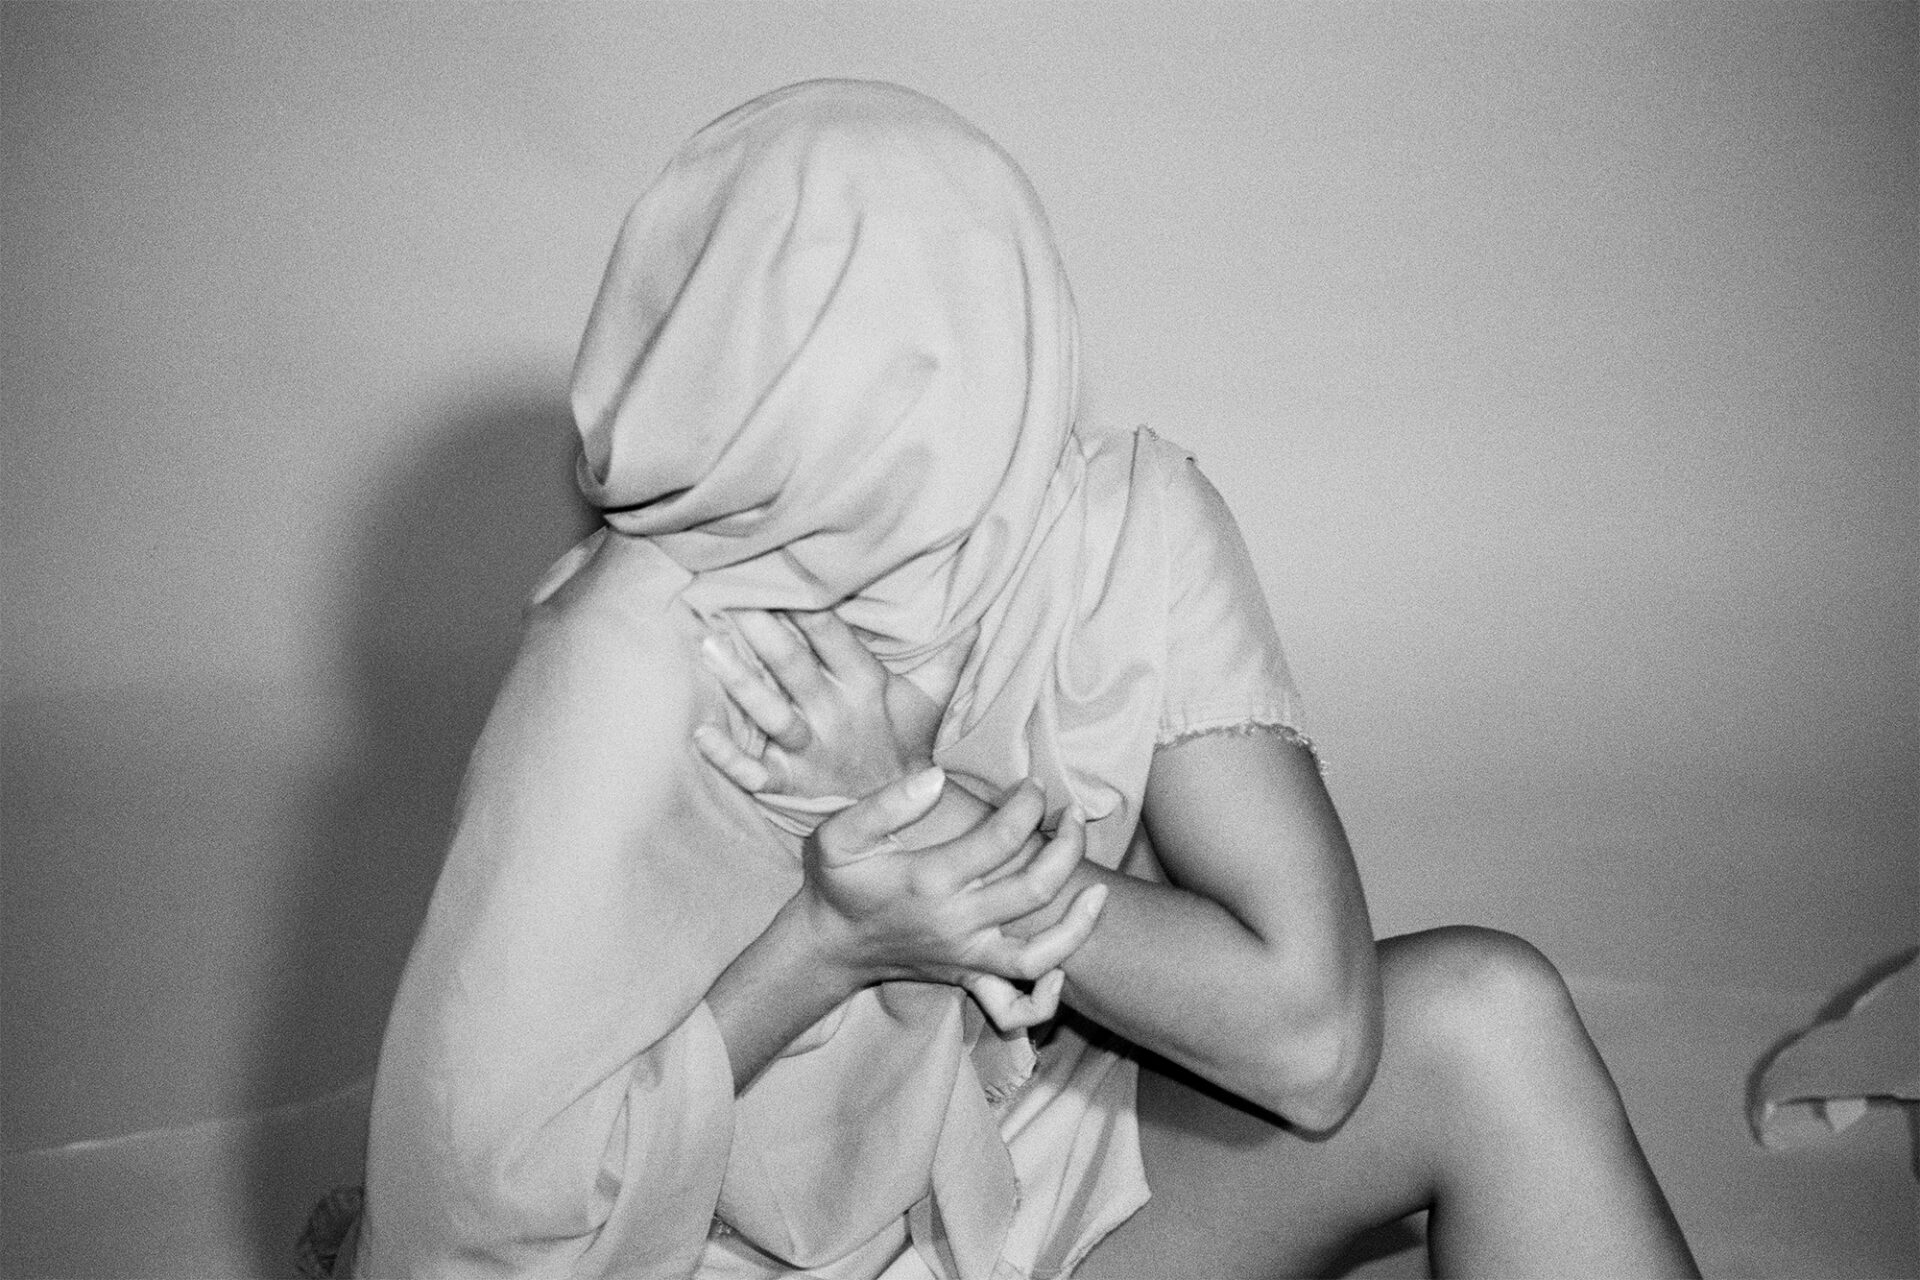 A Syntactical Drip By Jenica Heintzelman. This photograph depicts a woman wrapped up in cloth while sitting down